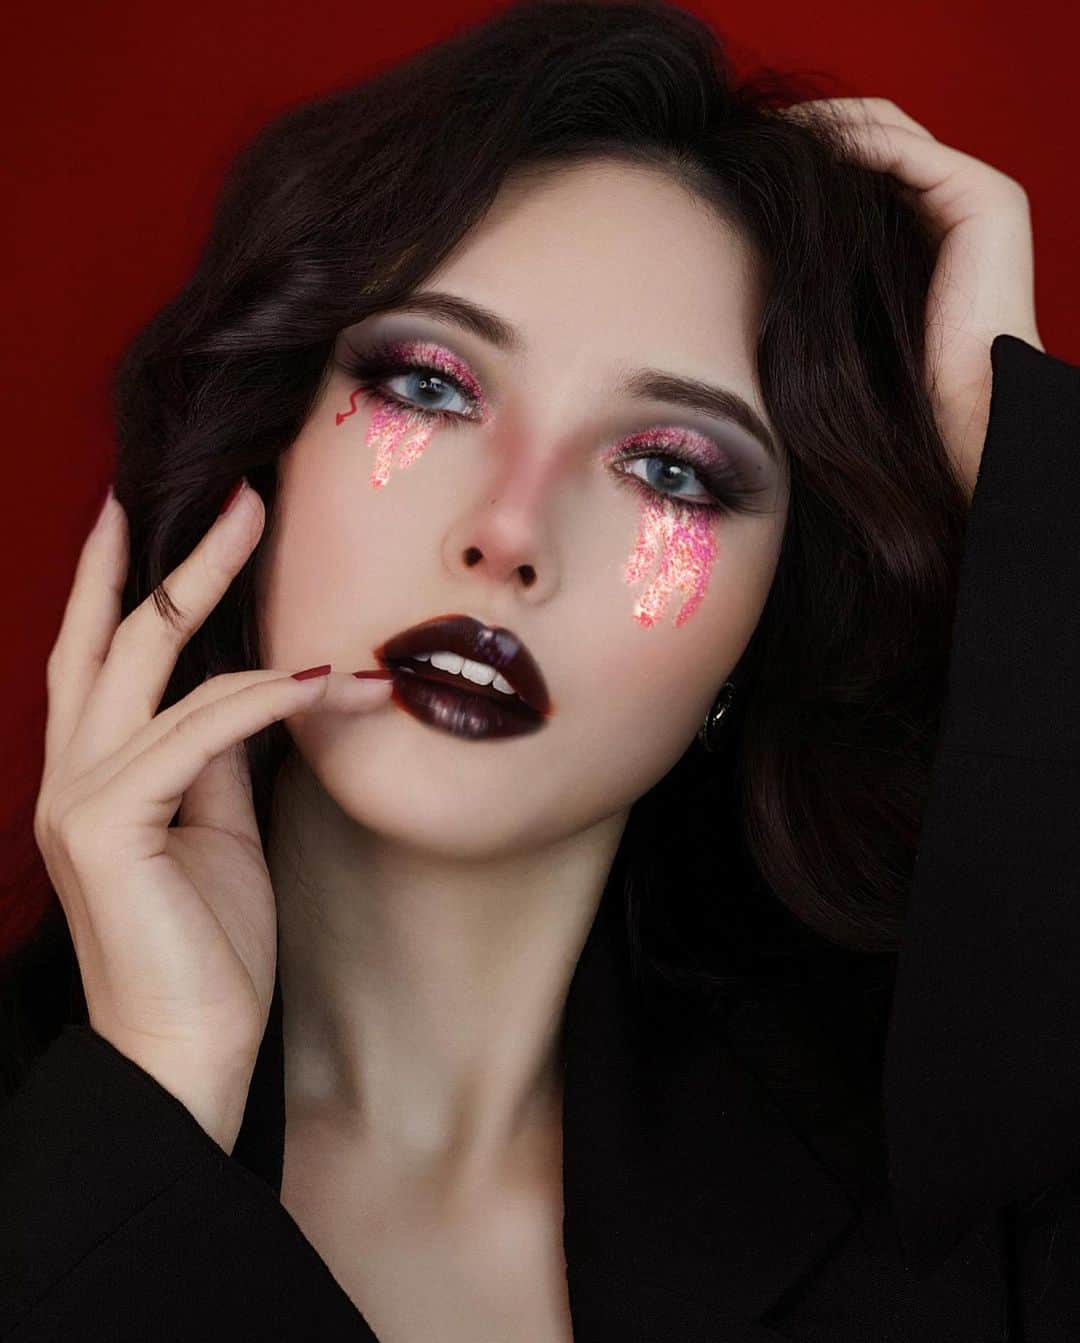 MakeupPlusのインスタグラム：「Get your Halloween night inspiration from MakeupPlus! Also, we will release our this year Halloween looks very soon. Stay tuned! Free download link in Bio. #makeupplus #halloweenmakeup #halloweeen」